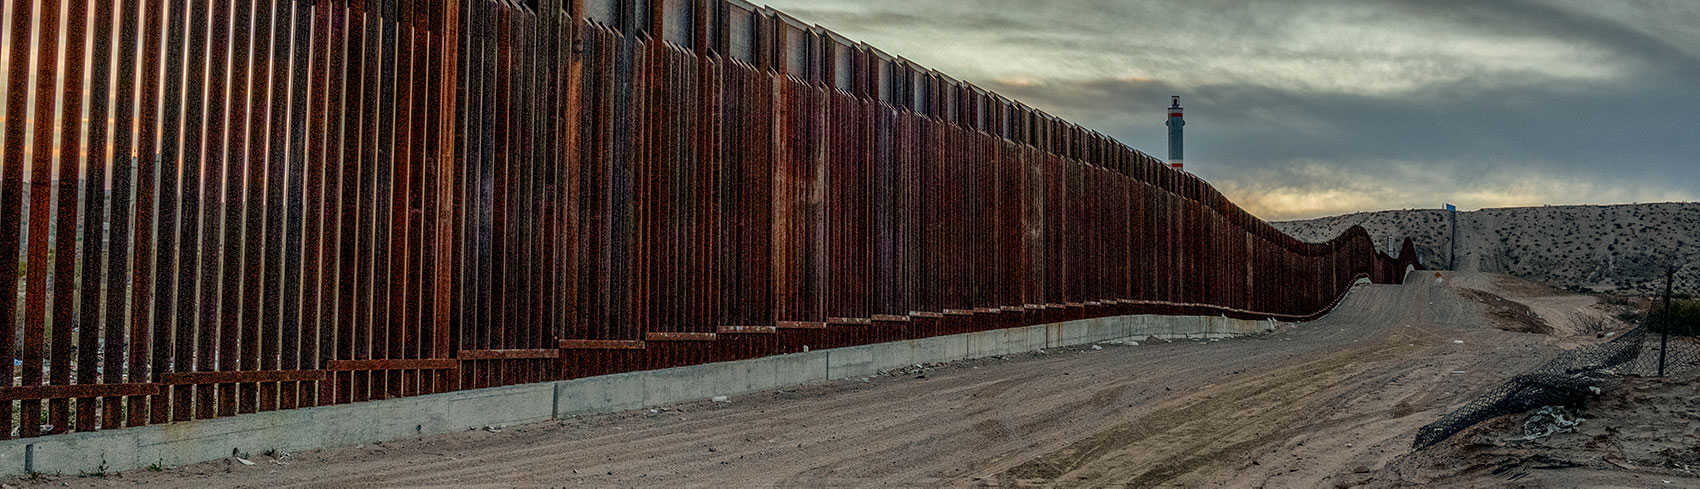 My view from the U.S.-Mexico border Banner Image